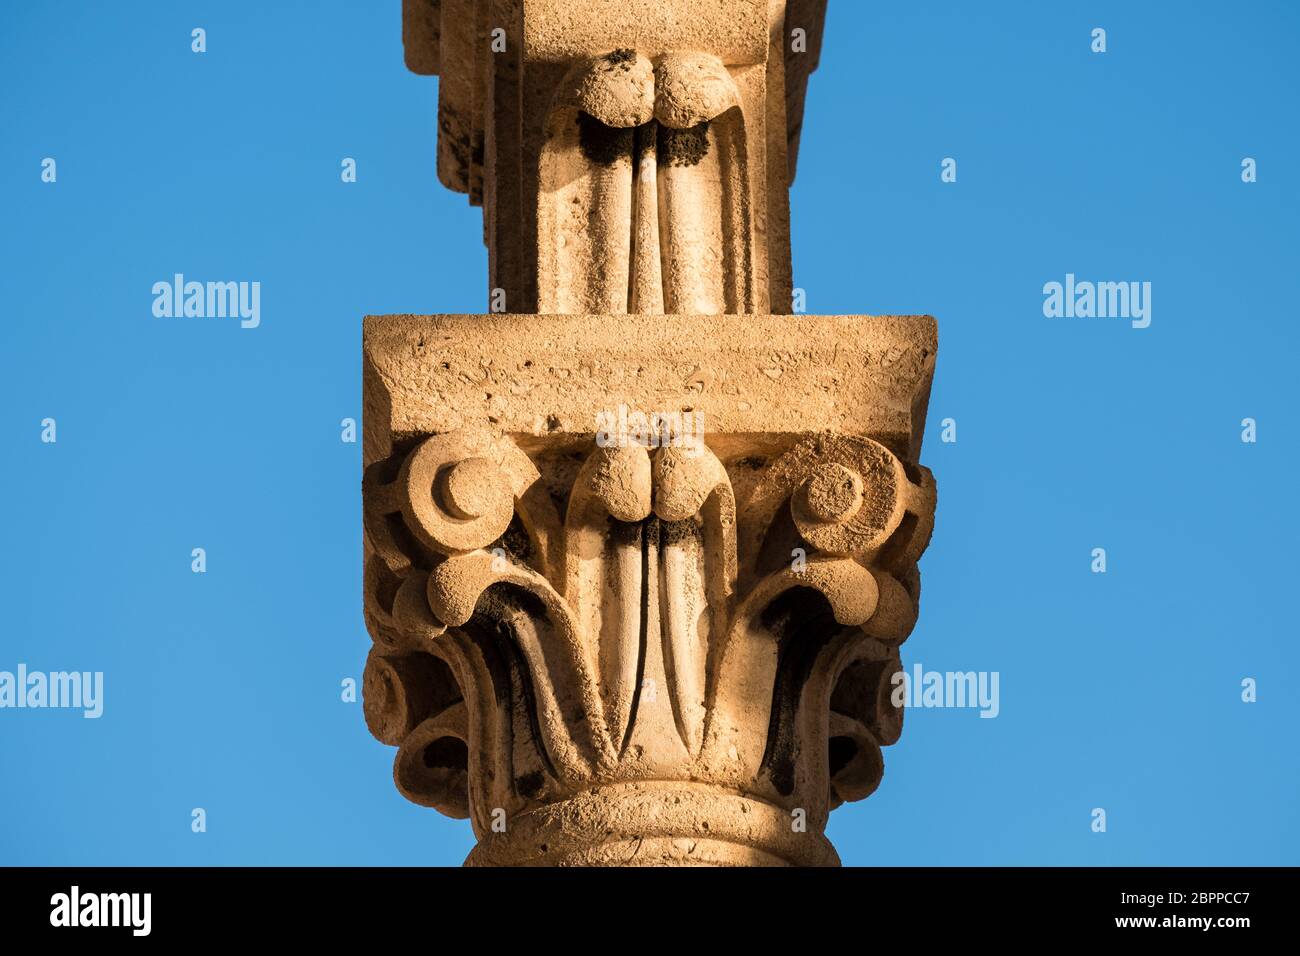 Close-up detail of a carved stone pillar at Saint Domnius Bell Tower in Split's Old Town, Croatia Stock Photo